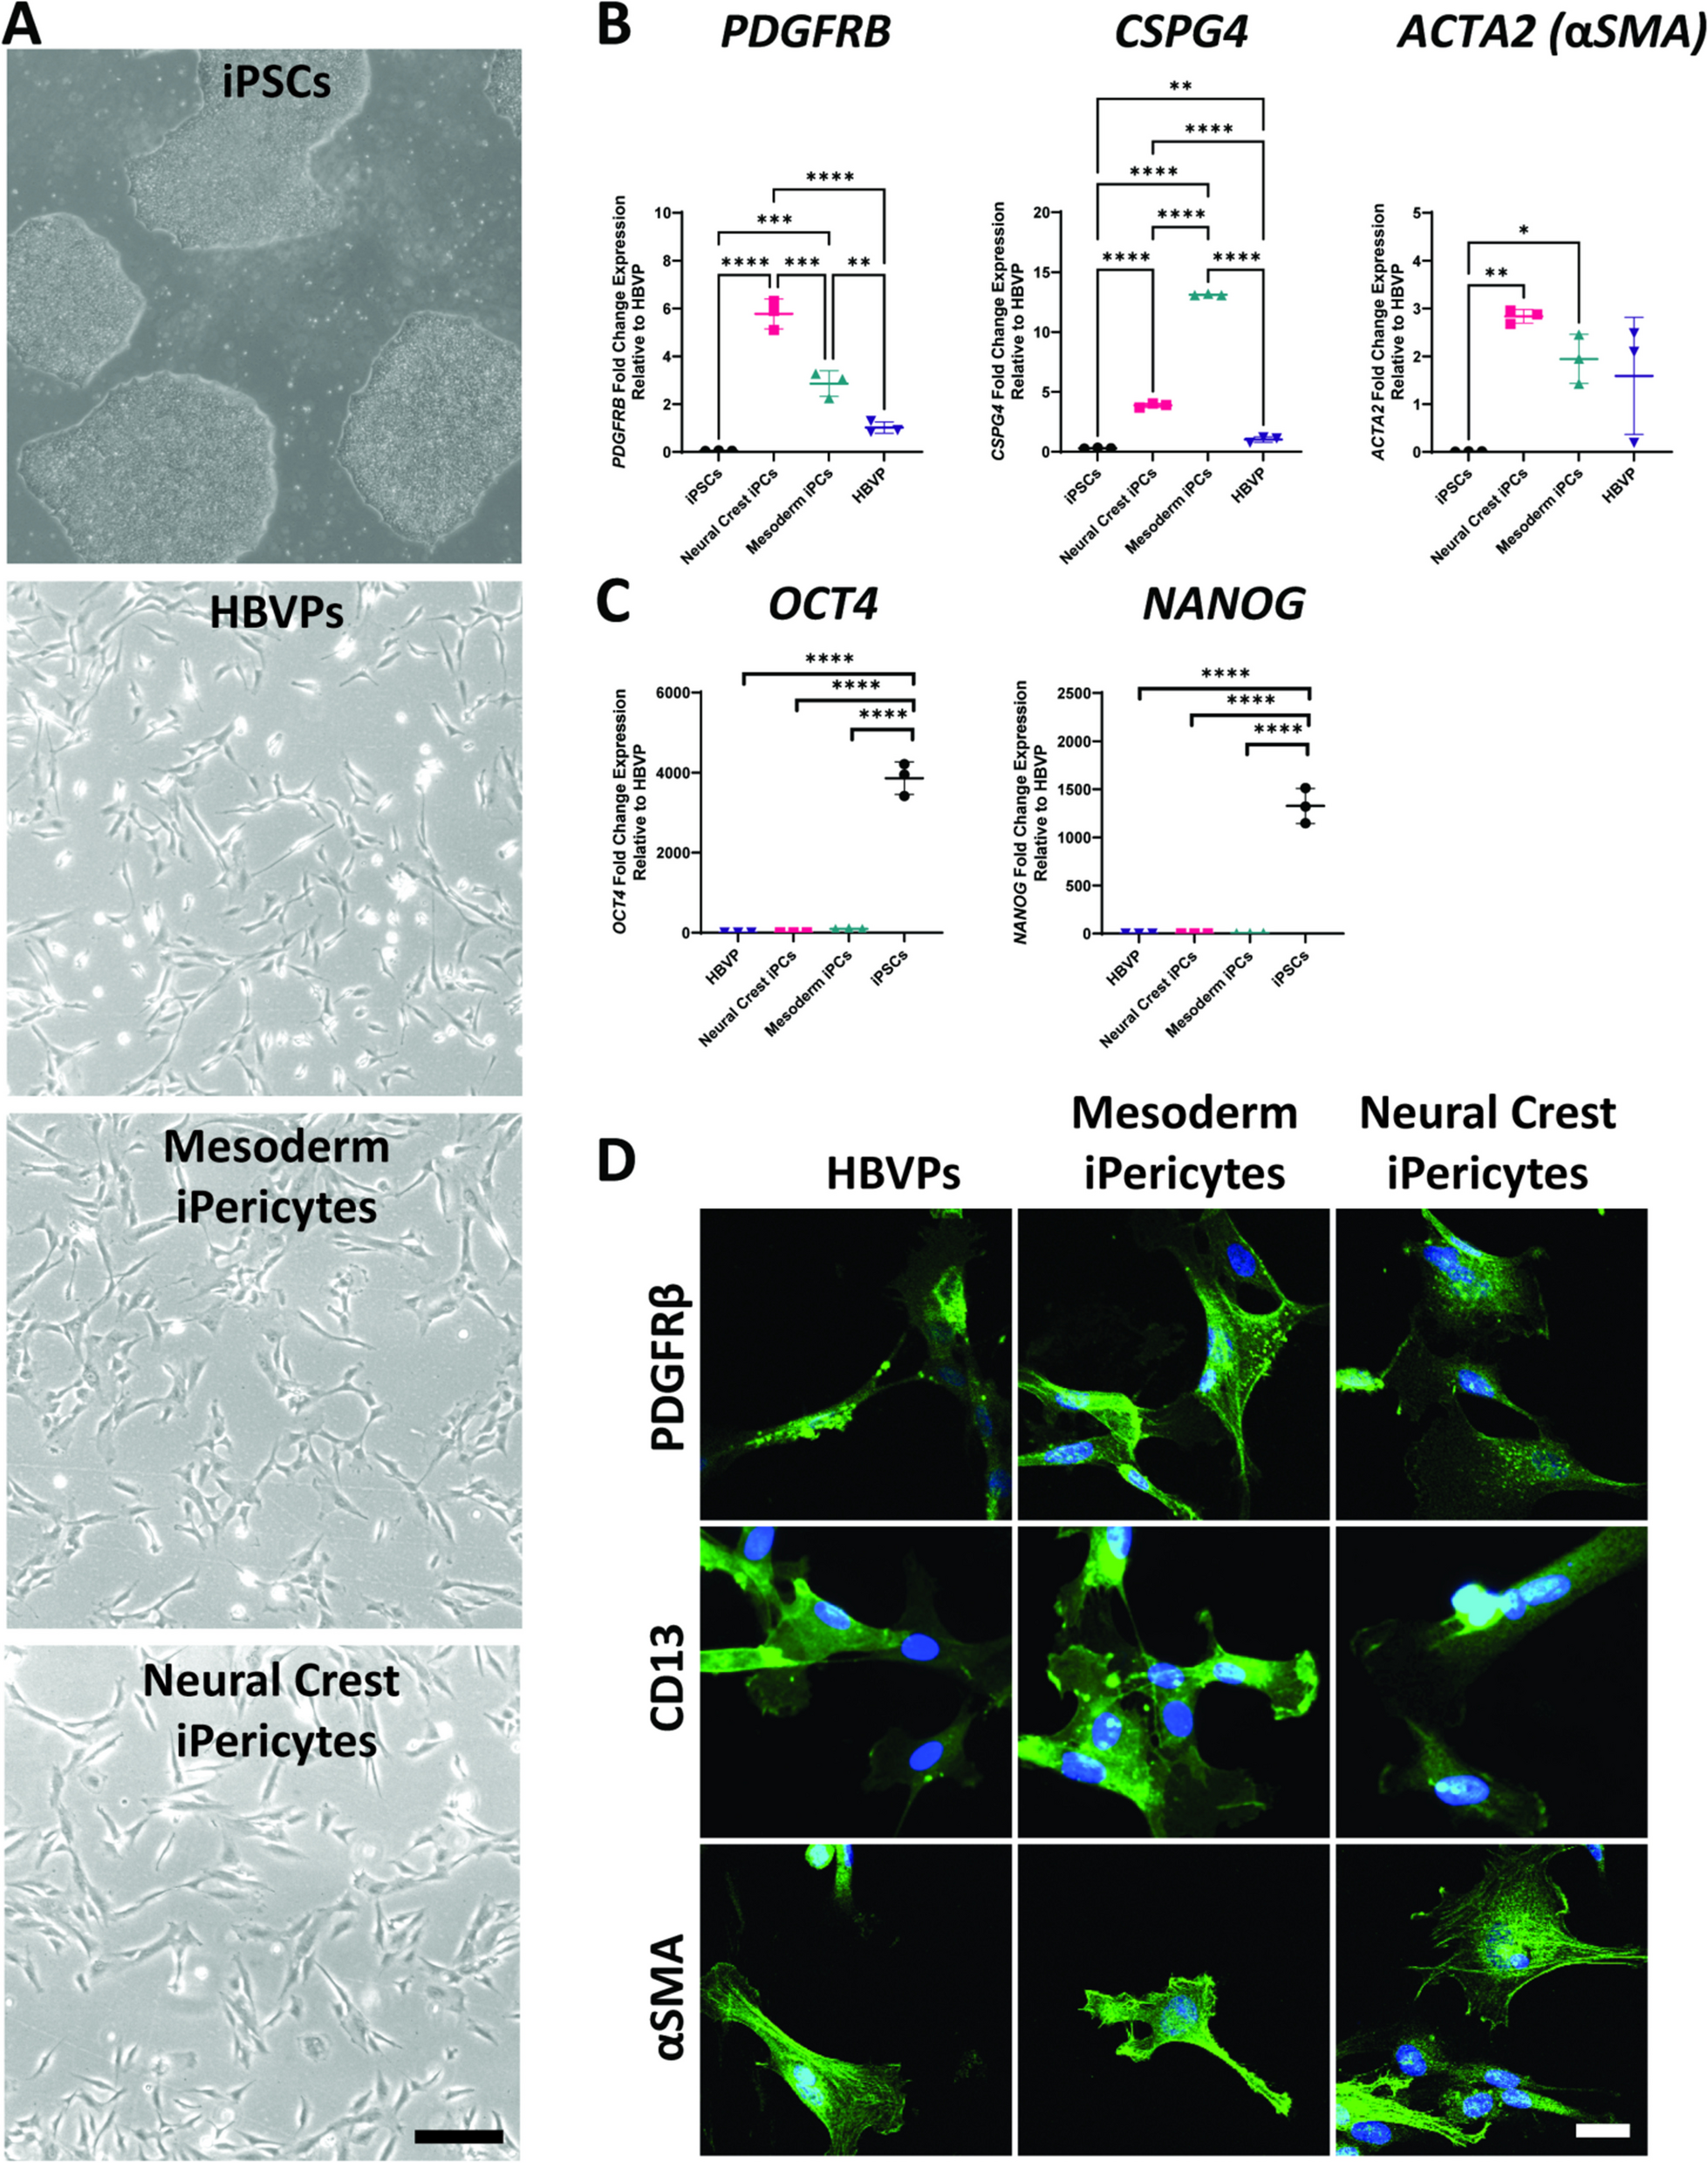 Induced pluripotent stem cell derived pericytes respond to mediators of proliferation and contractility